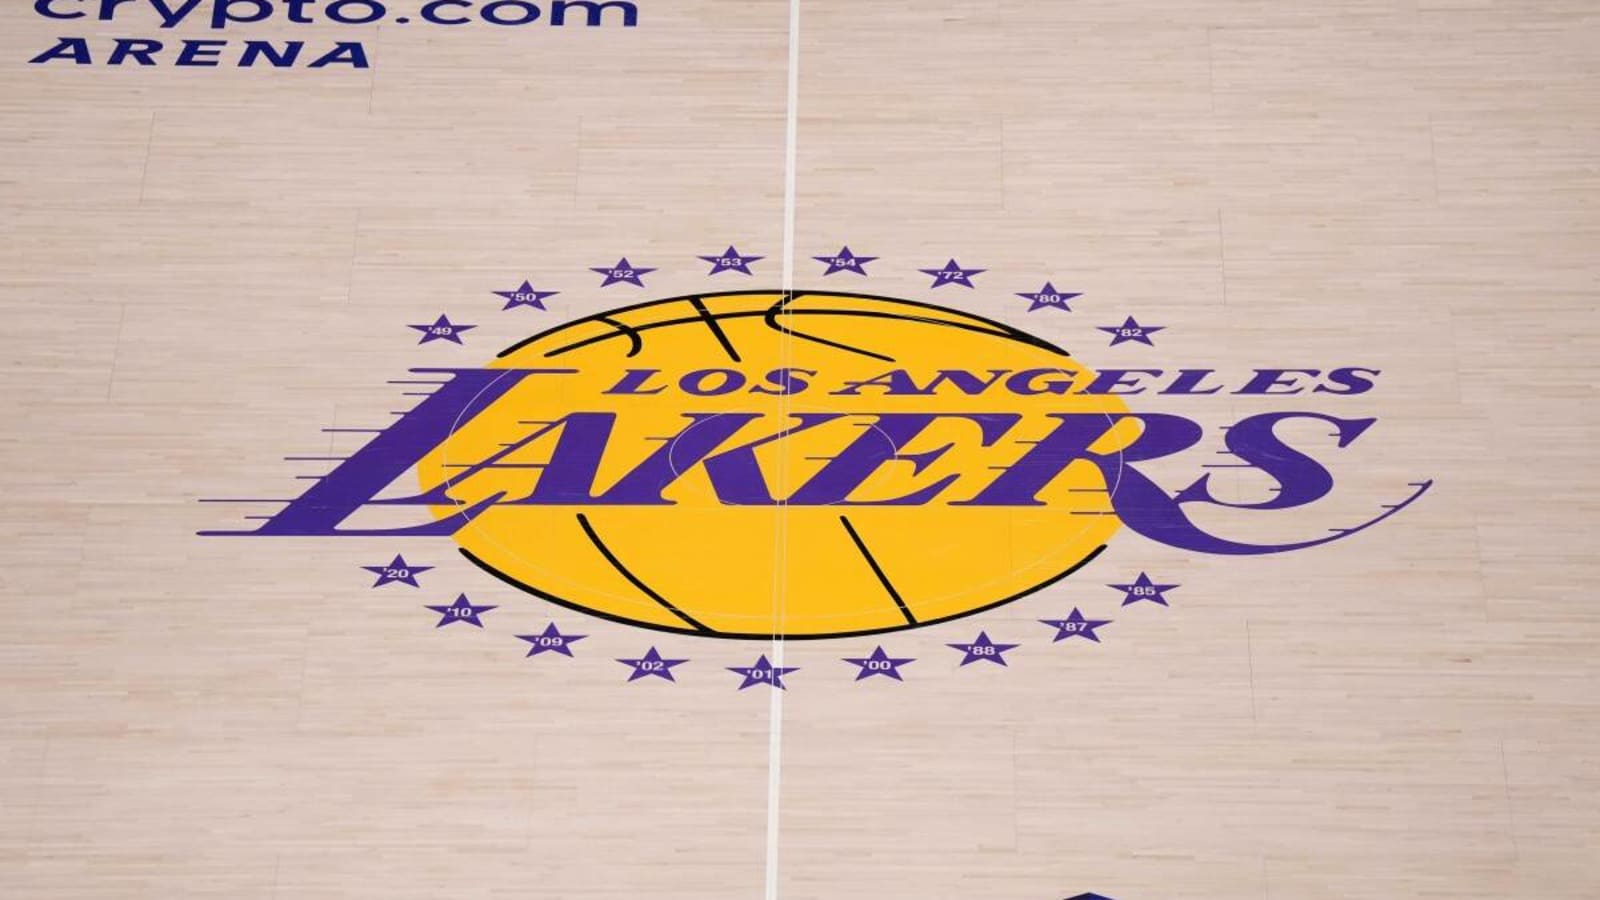 Lakers vs. Clippers. Where to get the original NBA fonts -   Playground